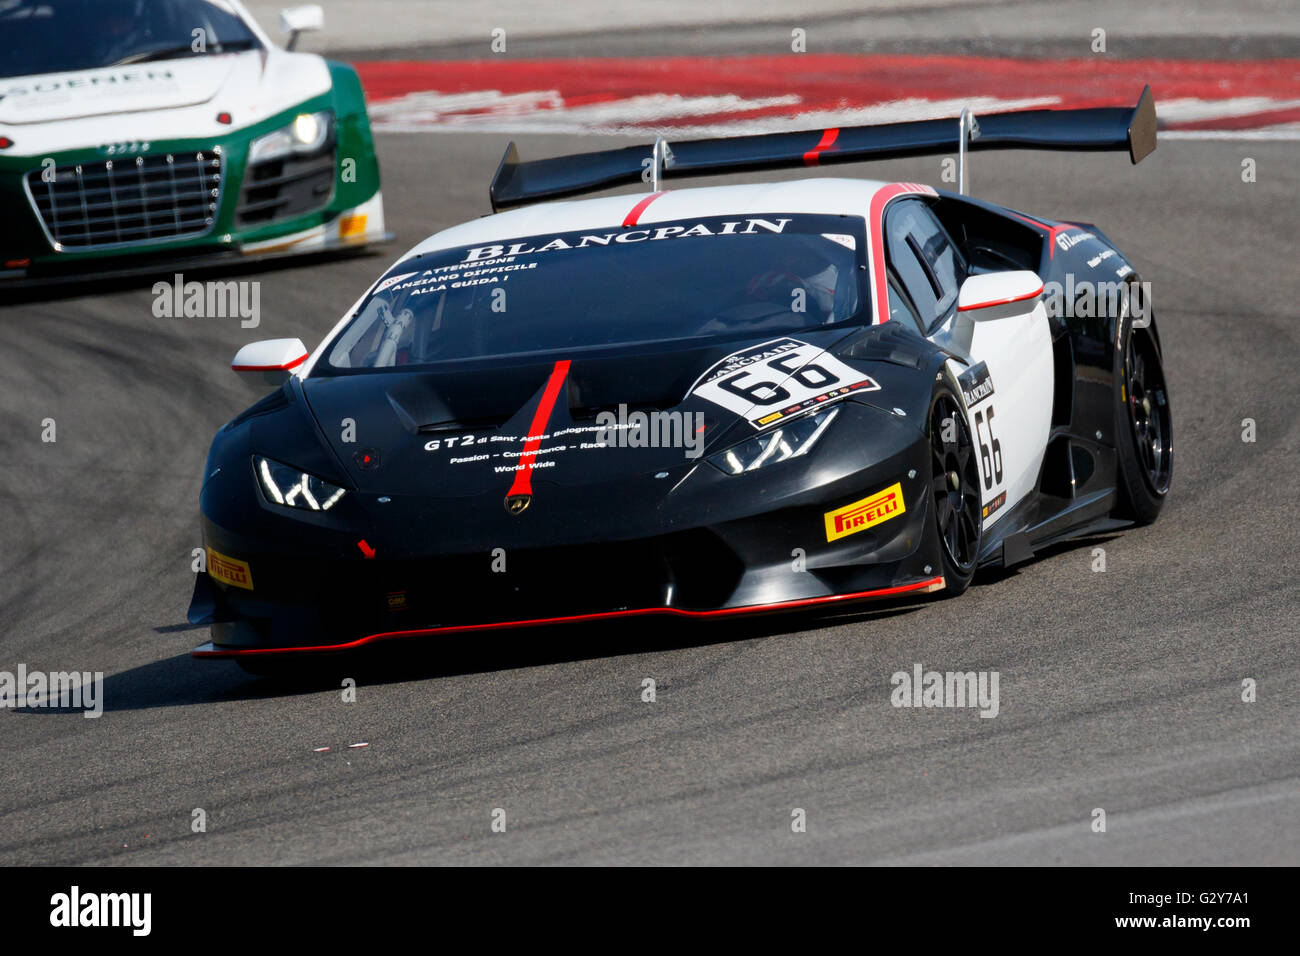 Misano Adriatico, Italy - April 10, 2016: Corvette C 6 ZR1 GTE of Attempto Racing Team, driven by Mauro CasadeiI, the Blancpain GT Sports Club Main Race in Misano World Circuit. Stock Photo